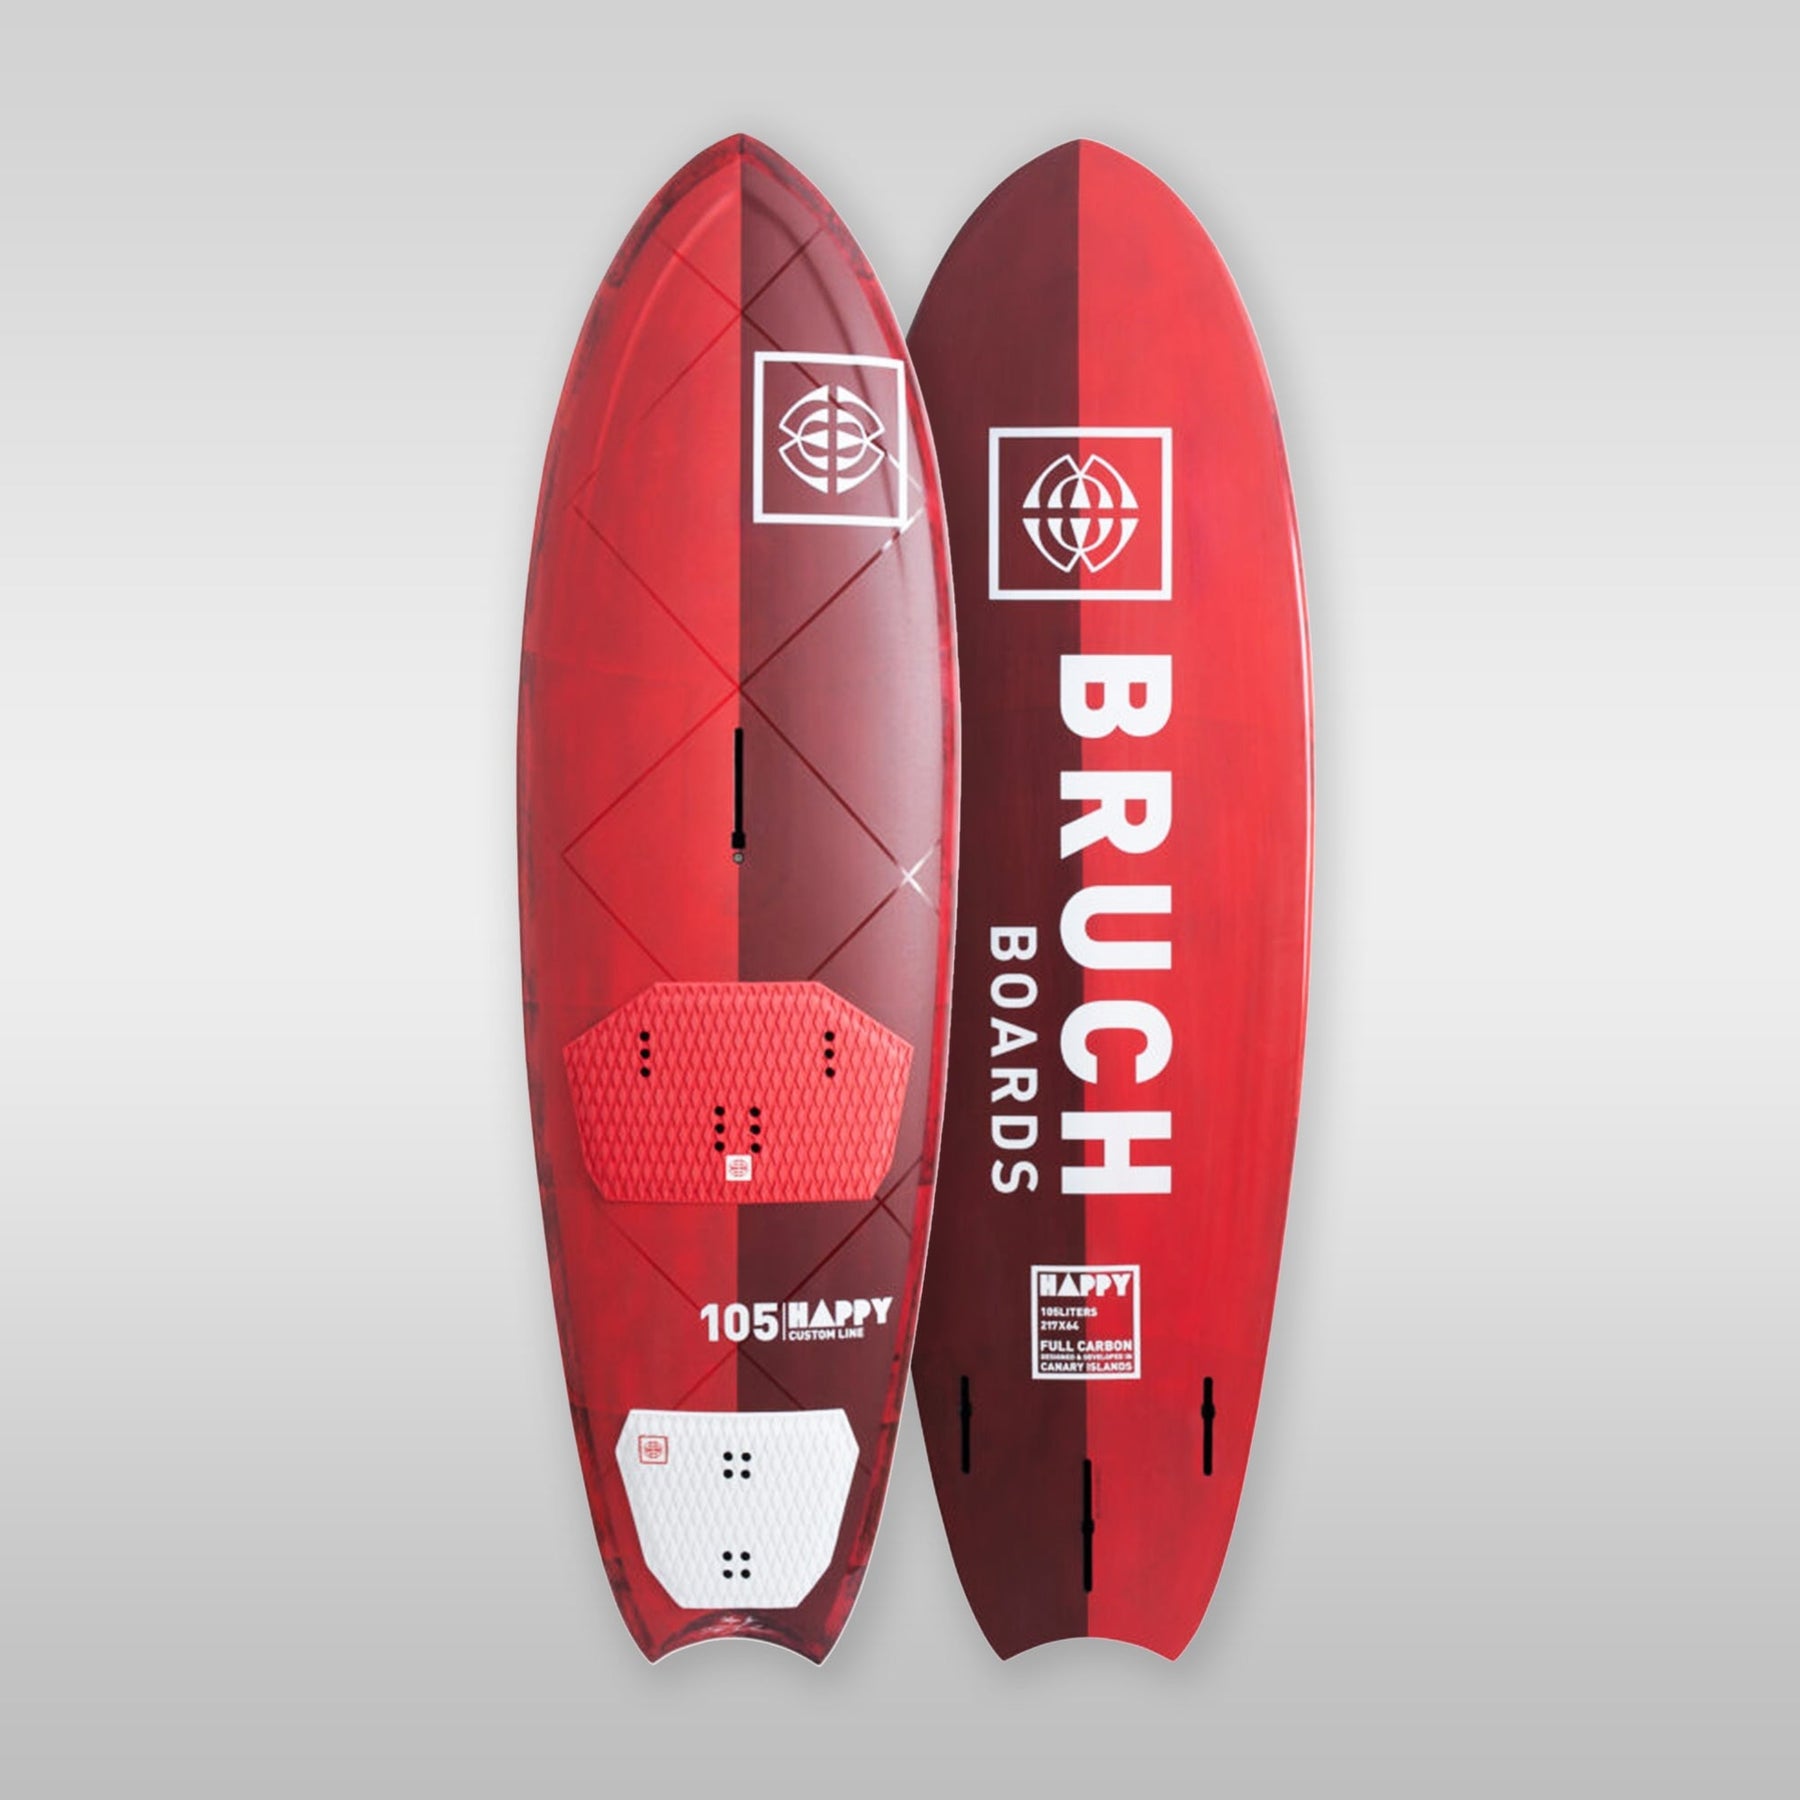 Windsurfshop windsurfwinkel windsurf-shop windsurf shop windsurfing shop windsurfing BruchBoards by Dany Bruch Happy